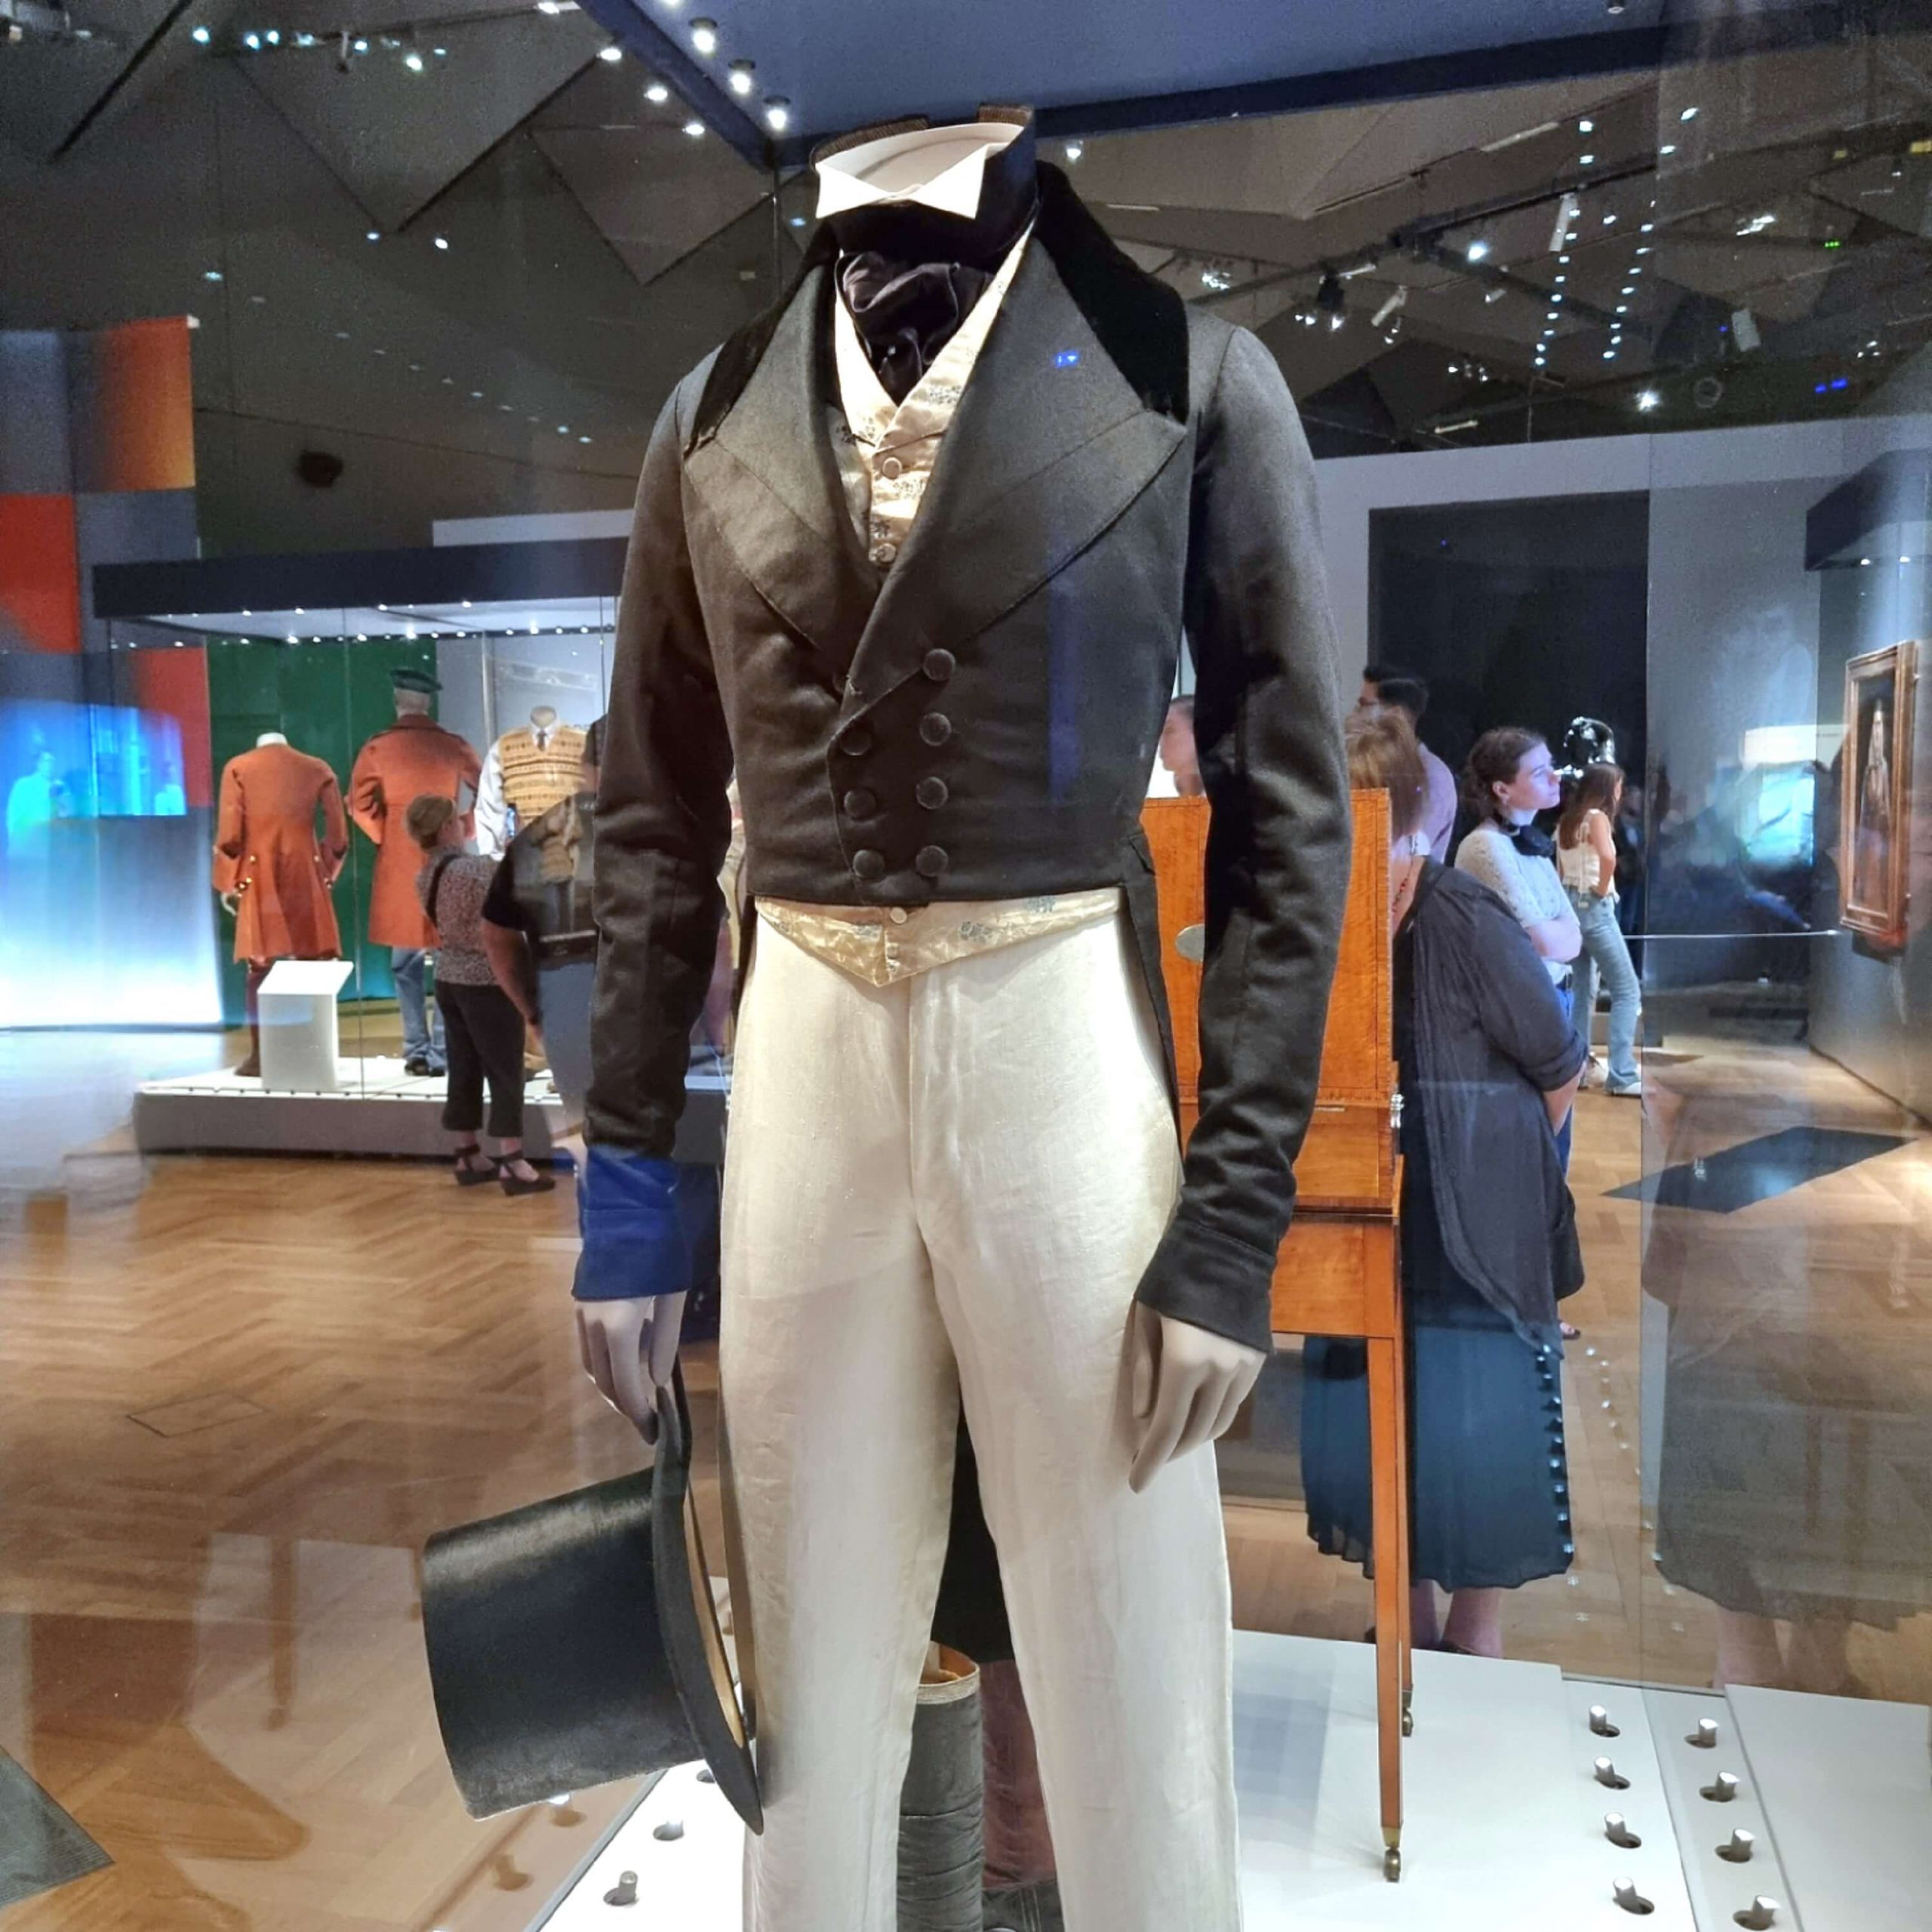 Outfit consisting of a coat, trousers, a waistcoat, a cravat and a top hat / 1845-55 / "Fashioning Masculinities. The Art of Menswear" at the V&A Museum, London / 2022